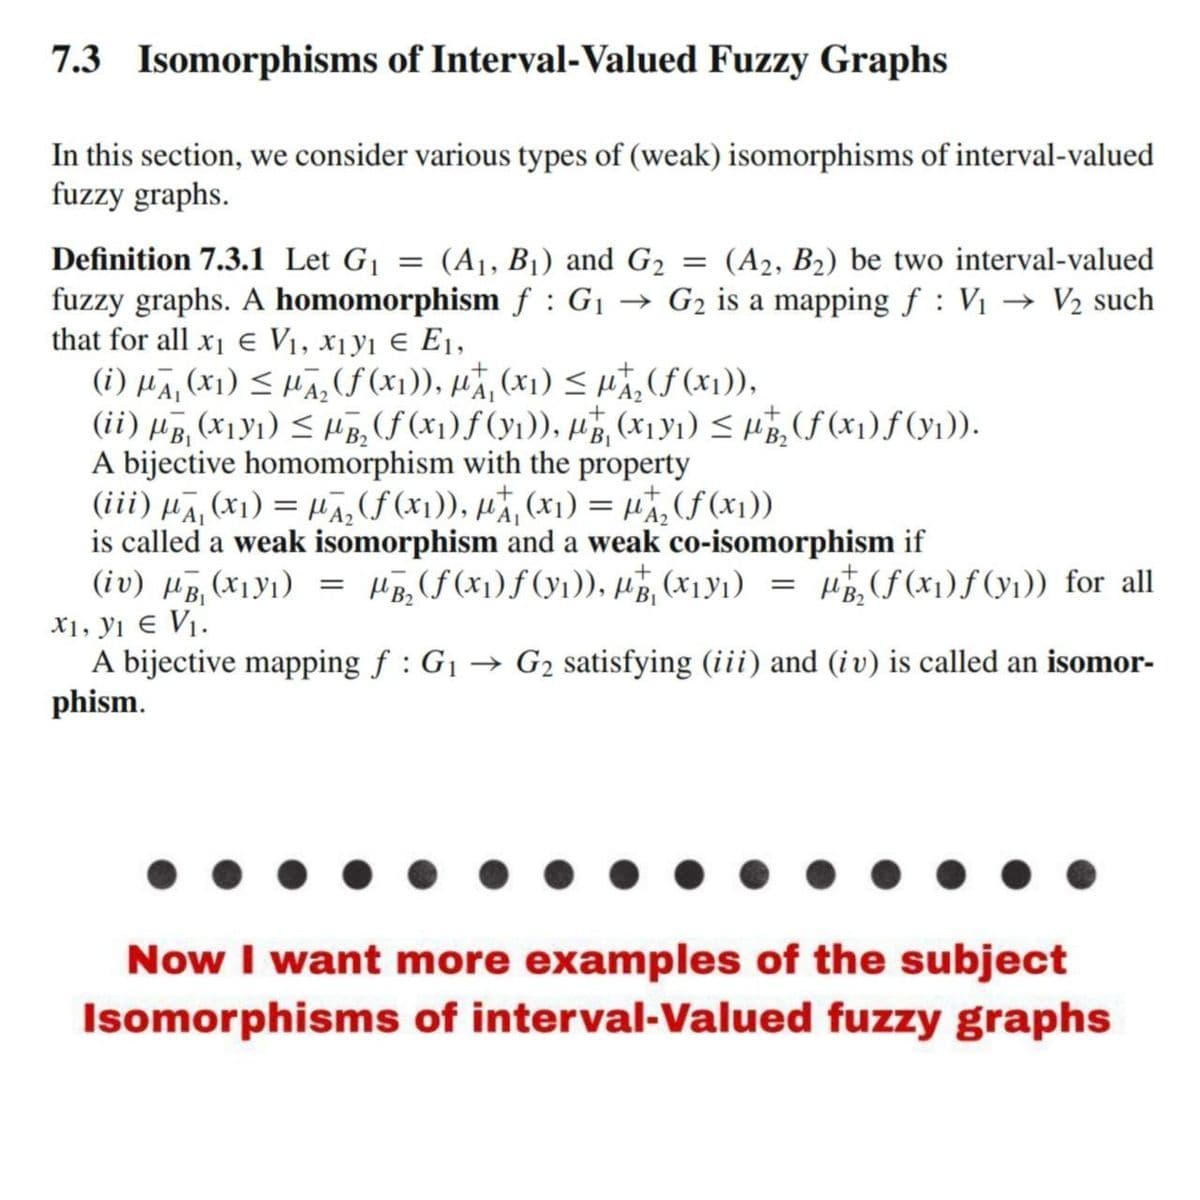 7.3 Isomorphisms of Interval-Valued Fuzzy Graphs
In this section, we consider various types of (weak) isomorphisms of interval-valued
fuzzy graphs.
Definition 7.3.1 Let G₁ = (A₁, B₁) and G₂
=
(A2, B₂) be two interval-valued
fuzzy graphs. A homomorphism f : G₁ → G₂ is a mapping f: V₁ → V₂ such
that for all x₁ € V₁, X₁y1 € E₁,
+
(i) μA, (x) ≤₂(f(x₁)), pt, (x₁) ≤ μ₂ (f(x₁)),
(ii) µß, (x1Y₁) ≤ µB₂ (ƒ (x₁) ƒ (y₁)), µg, (x₁y₁) ≤ µg₂ (ƒ (x₁) ƒ (y₁)).
A bijective homomorphism with the property
(iii) μA, (x1) = μA₂ (ƒ (x₁)), μ₁ (x₁) = µ₂ (f(x₁))
is called a weak isomorphism and a weak co-isomorphism if
(iv) HB₁ (X1Y1) = HB₂ (f(x₁) ƒ (y₁)), PT, (x₁v₁) = µ/₂2 (f(x₁)ƒ (₁)) for all
X1, y1 € V₁.
A bijective mapping f: G₁ → G₂ satisfying (iii) and (iv) is called an isomor-
phism.
Now I want more examples of the subject
Isomorphisms of interval-Valued fuzzy graphs